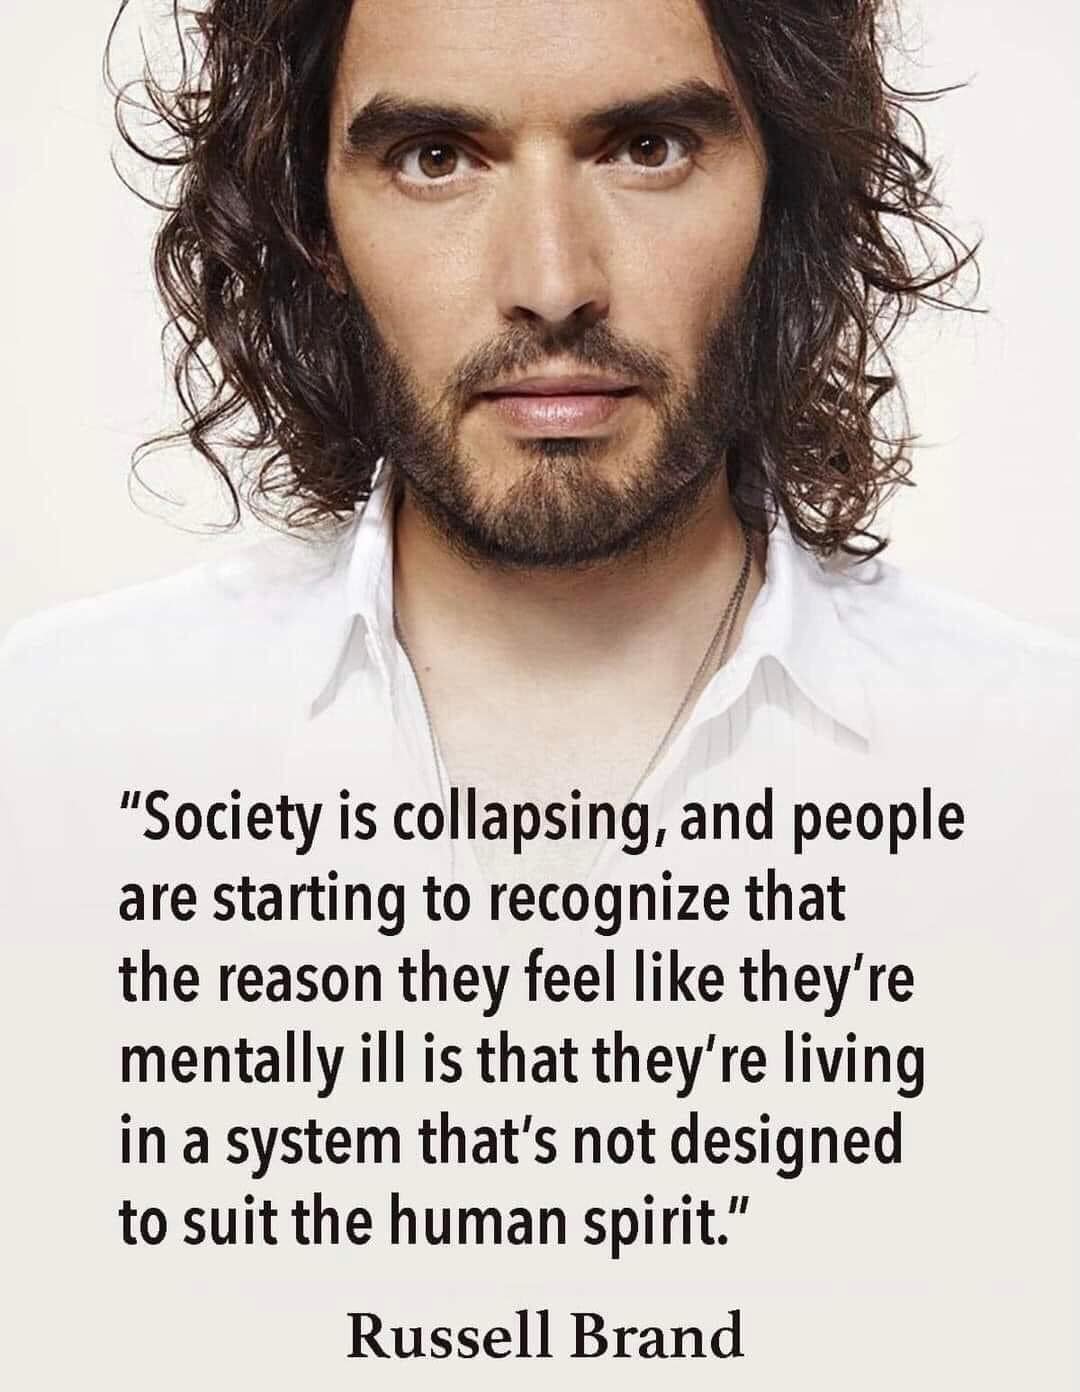 society is collapsing, and people are starting to recognize that the reason they feel like they're mentally ill is that they're living in a system that's not designed to suit the human spirit, russell brand